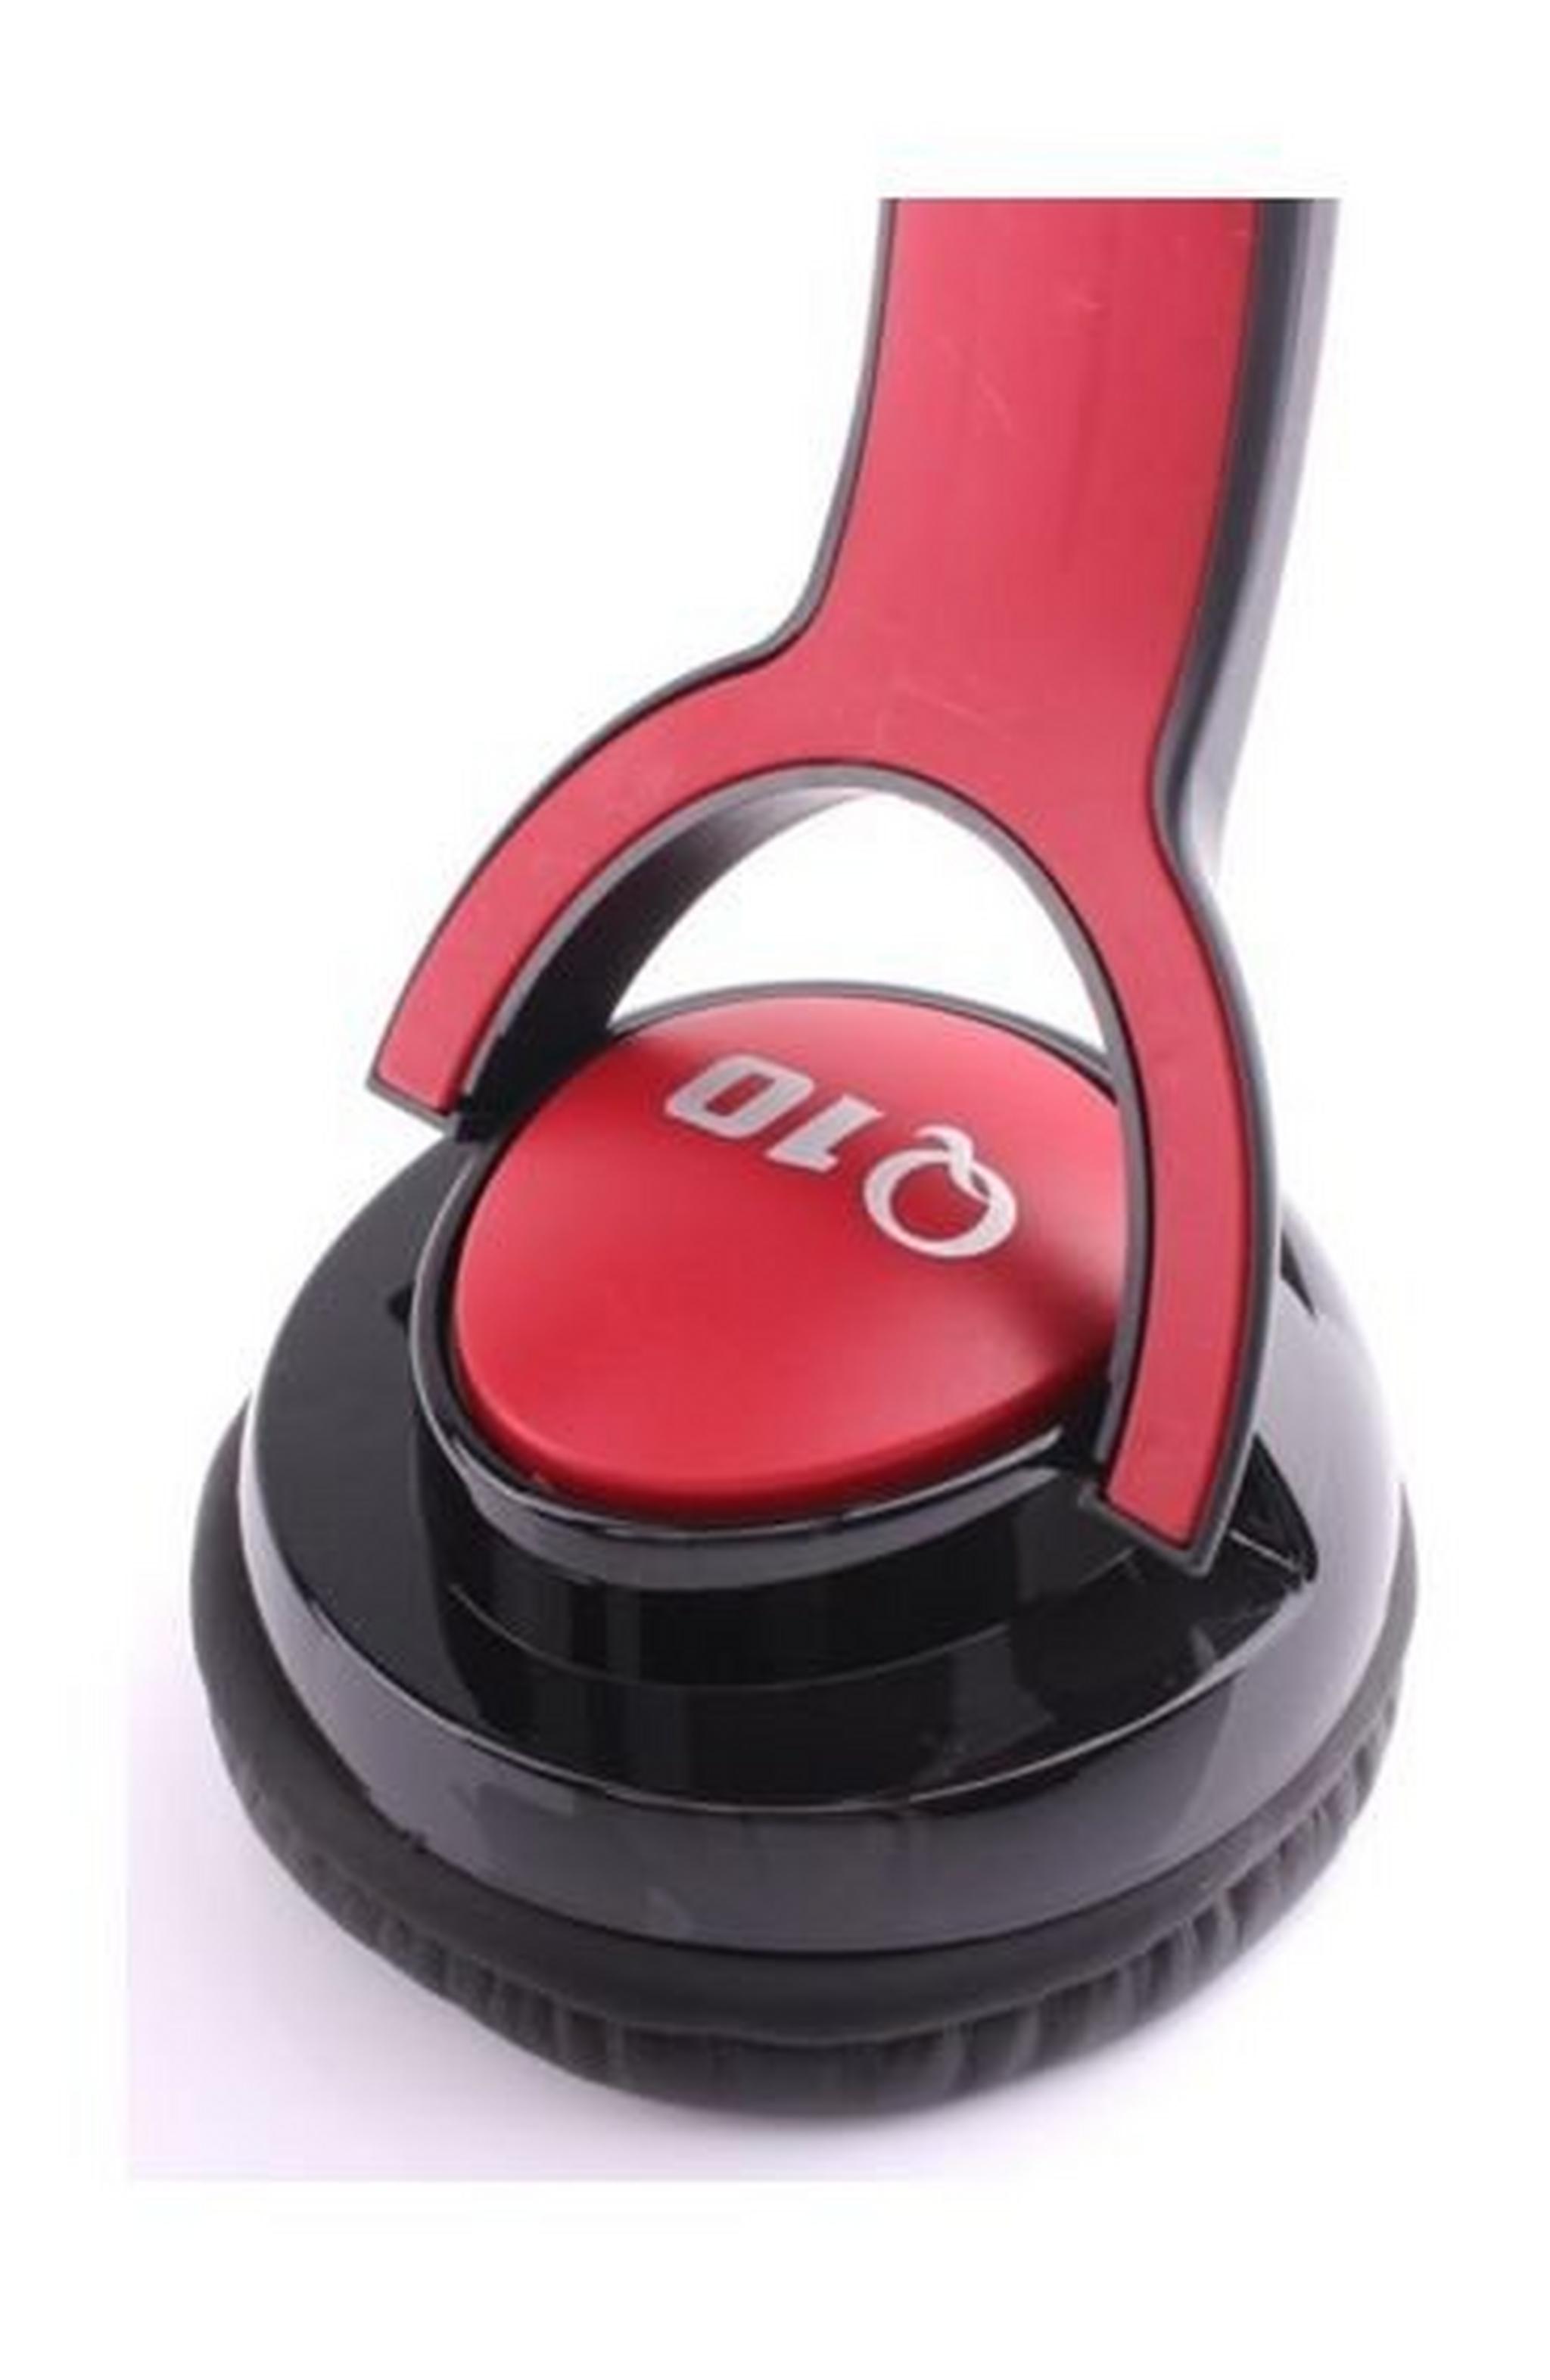 Ovleng Q10 USB Wired On-Ear Headset With Mic - Black